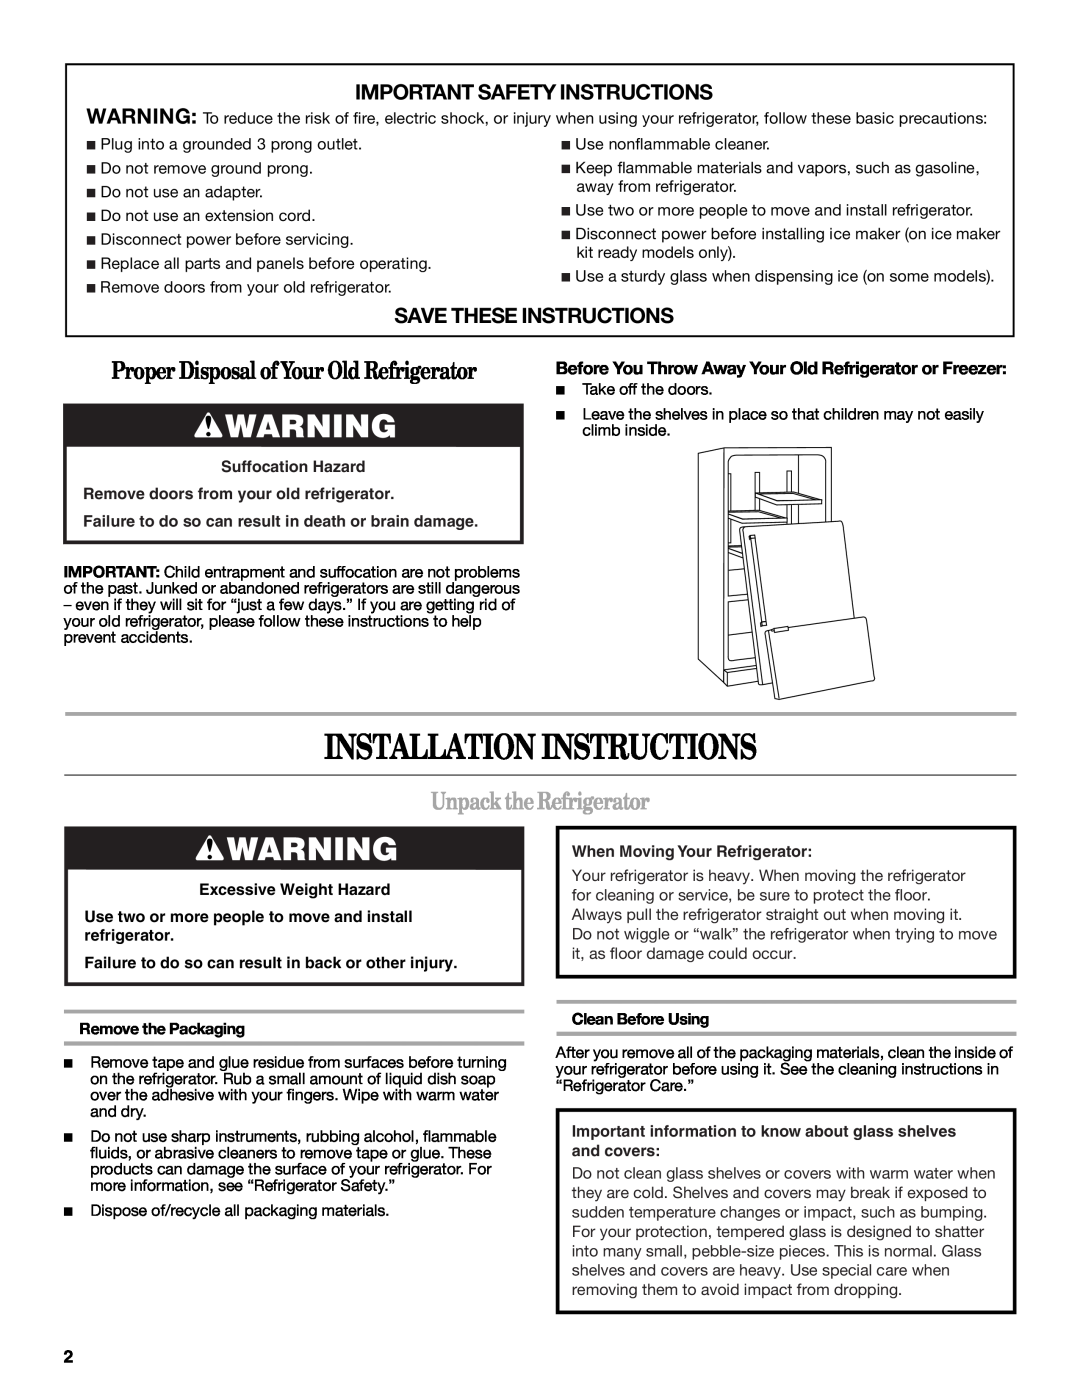 Whirlpool 12828188A Installation Instructions, Unpack the Refrigerator, Important Safety Instructions, Suffocation Hazard 